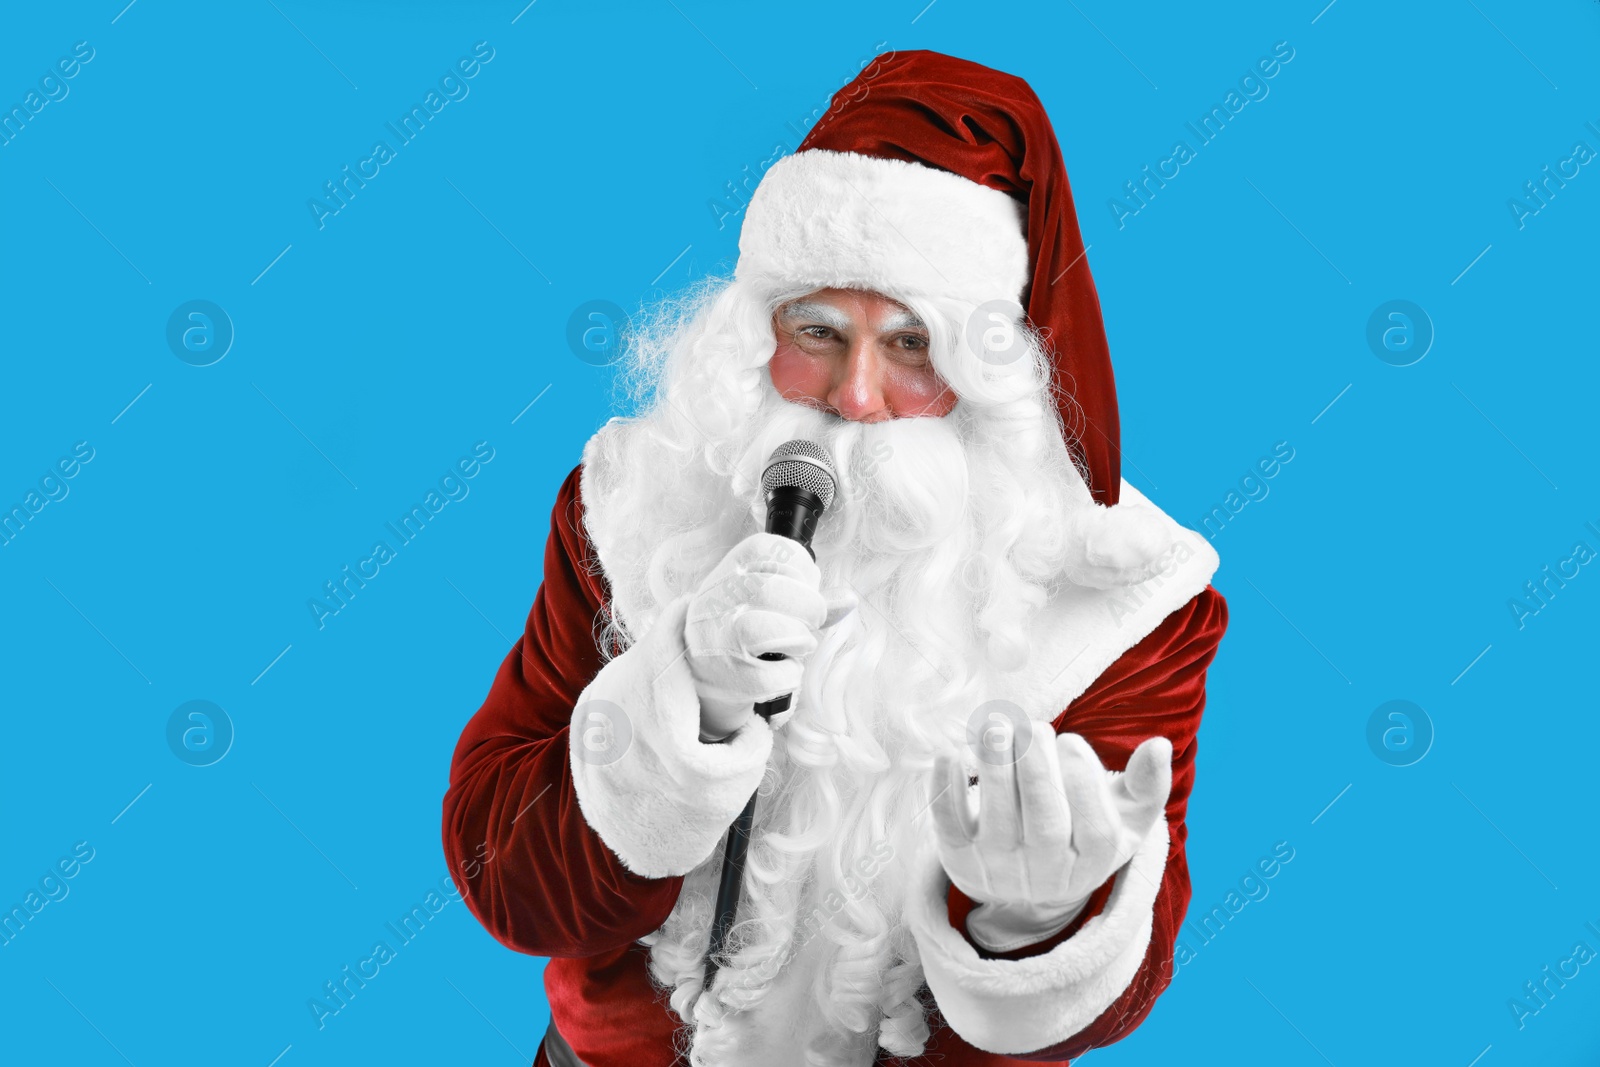 Photo of Santa Claus singing with microphone on blue background. Christmas music